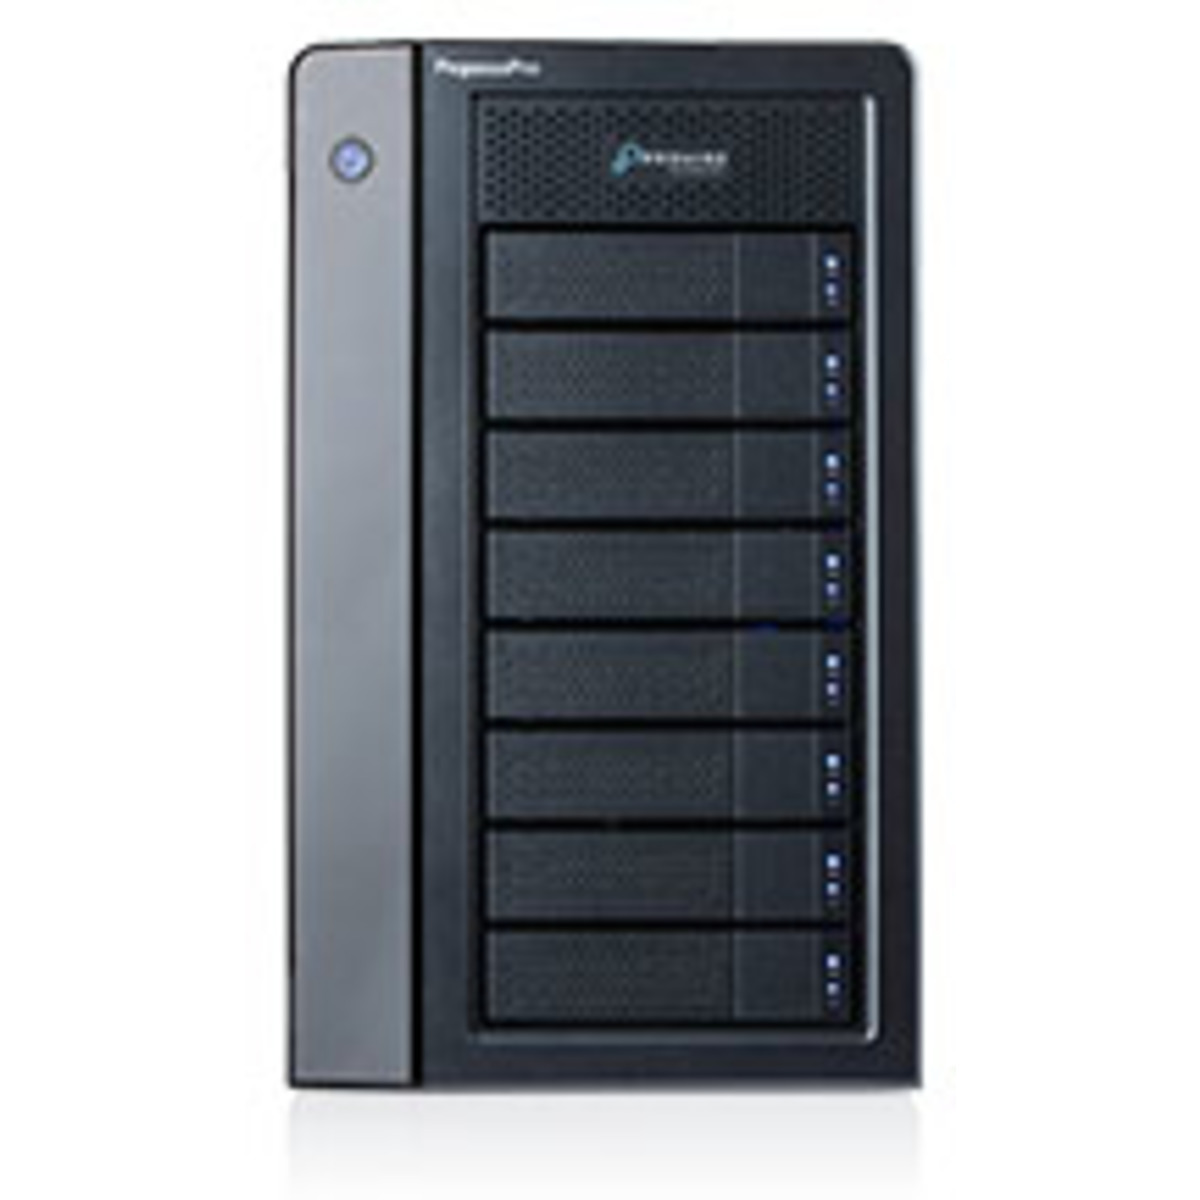 Promise Technology PegasusPro R8 48tb 8-Bay Desktop Multimedia / Power User / Business DAS-NAS - Combo Direct + Network Storage Device 6x8tb TeamGroup EX2 Elite T253E2008T0C101 2.5 550/520MB/s SATA 6Gb/s SSD CONSUMER Class Drives Installed - Burn-In Tested PegasusPro R8